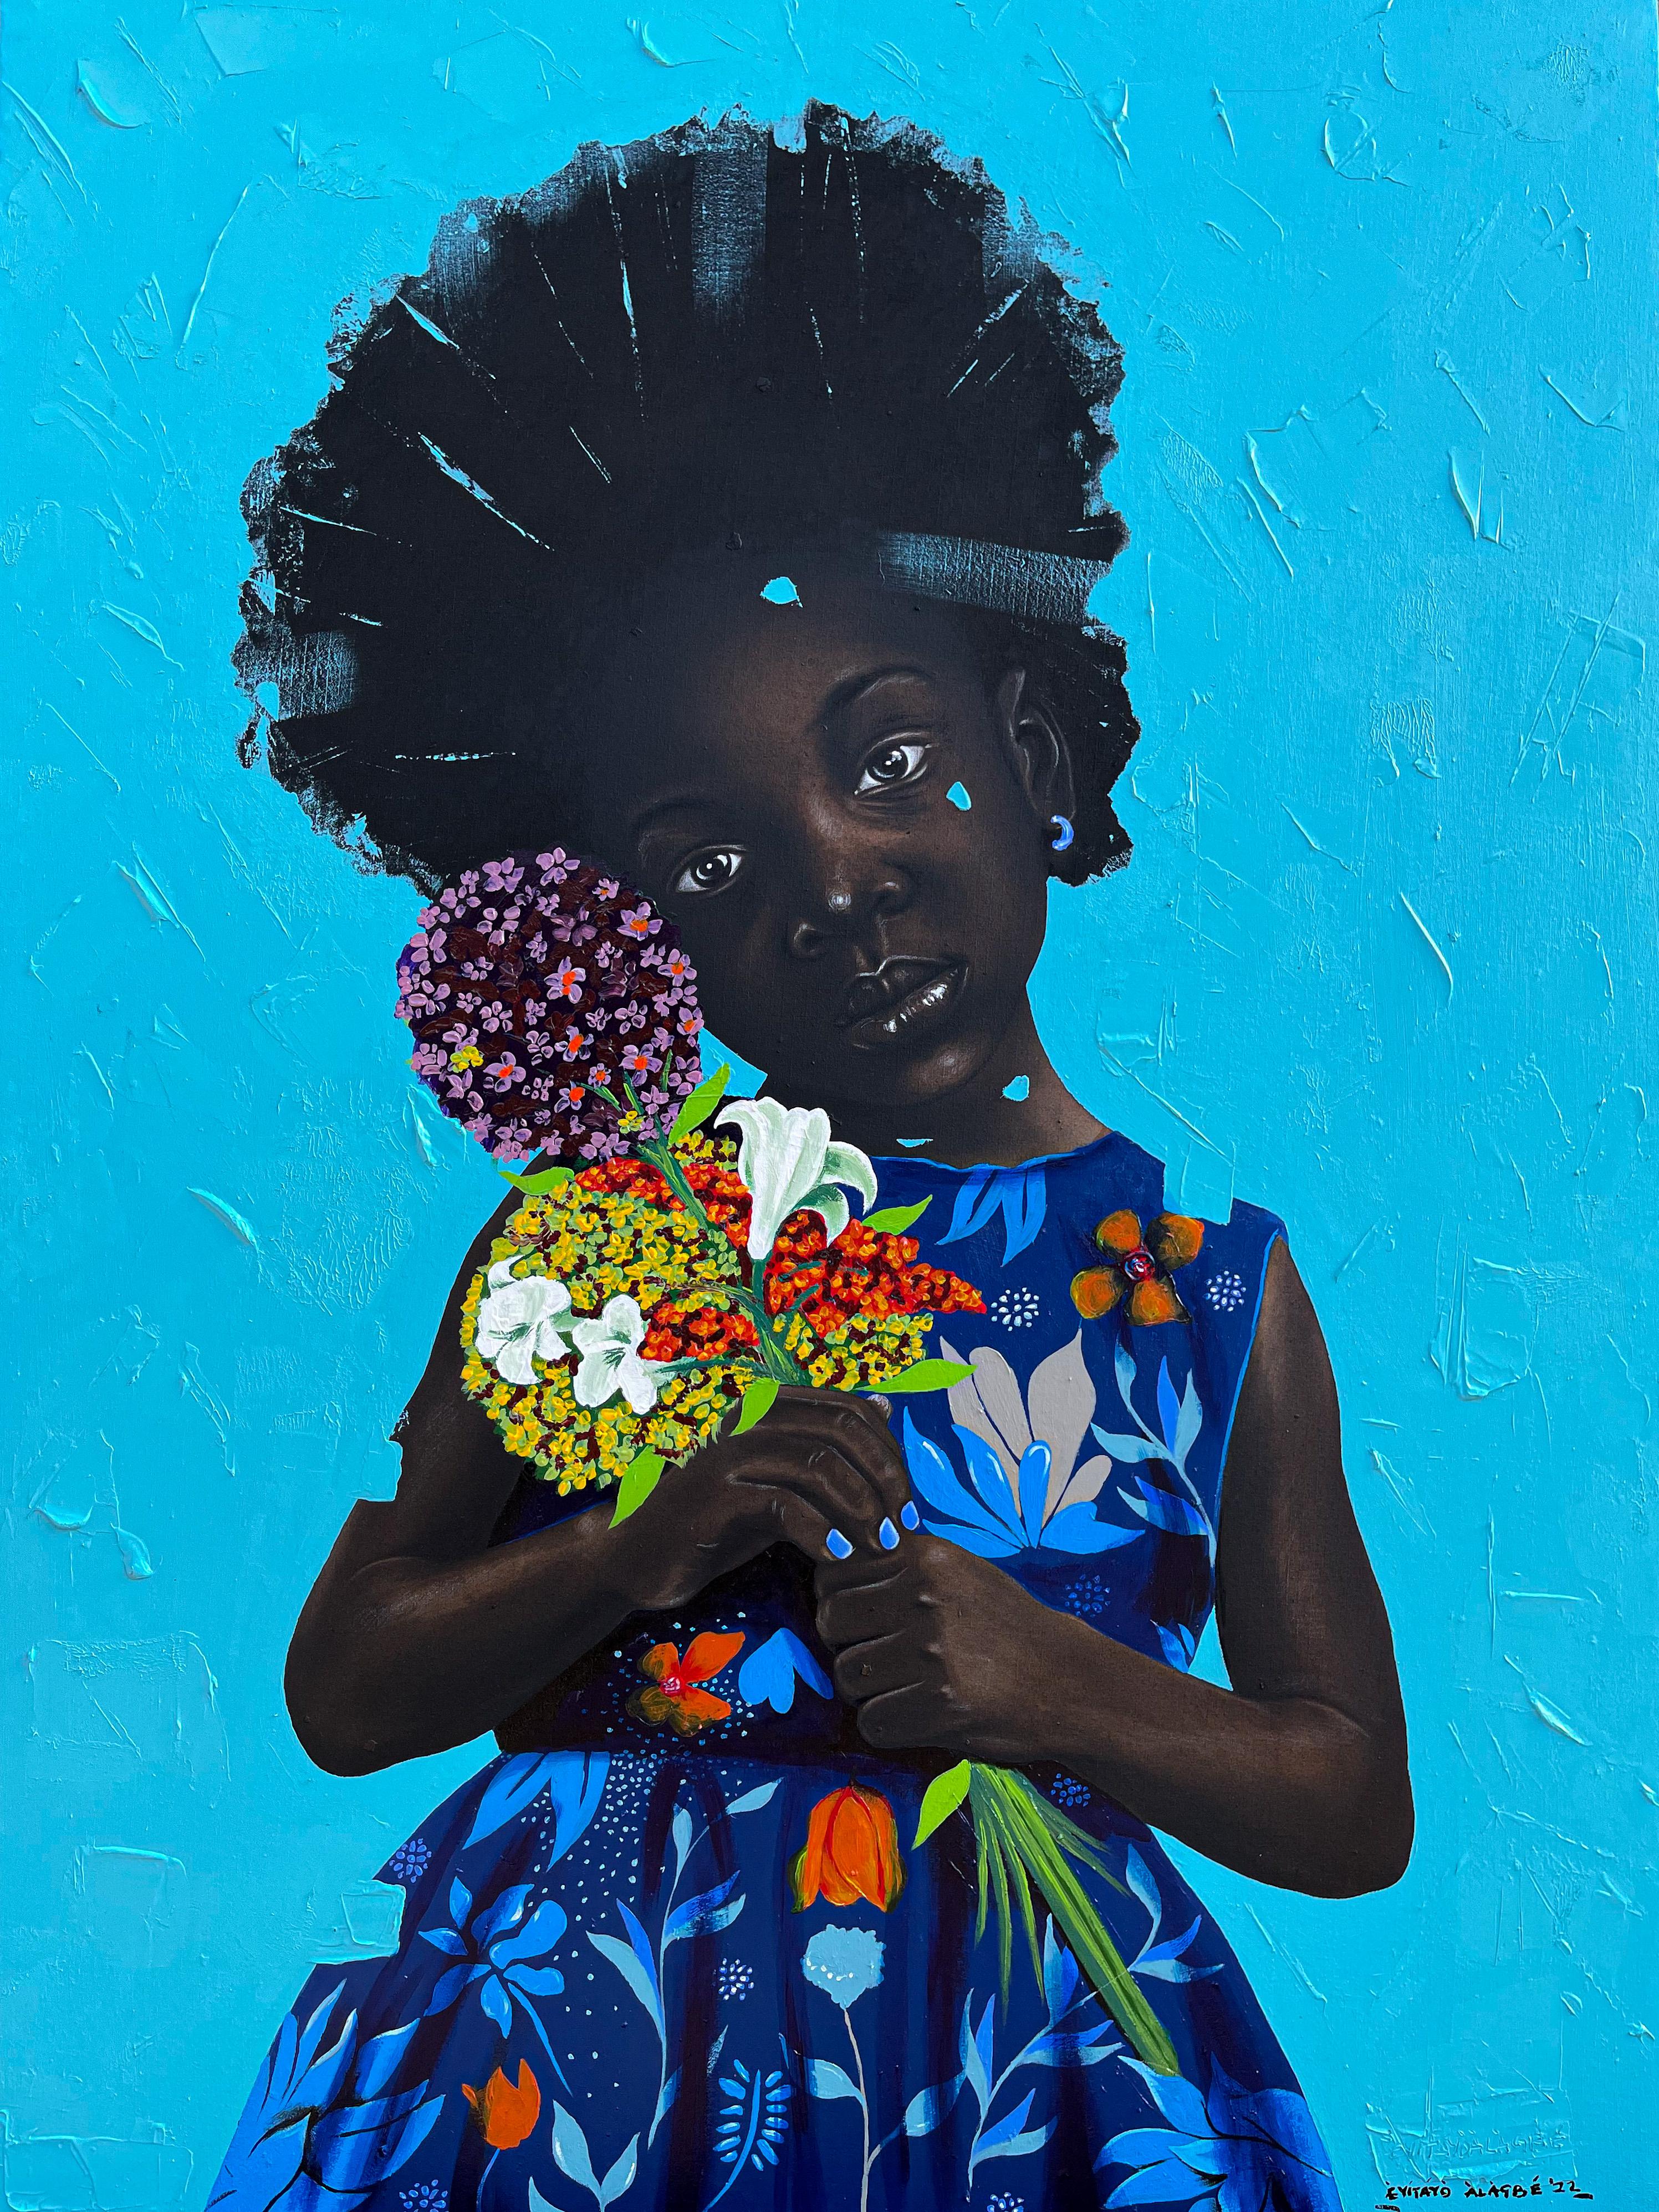 Give Us Our Flowers - Mixed Media Art by Eyitayo Alagbe 